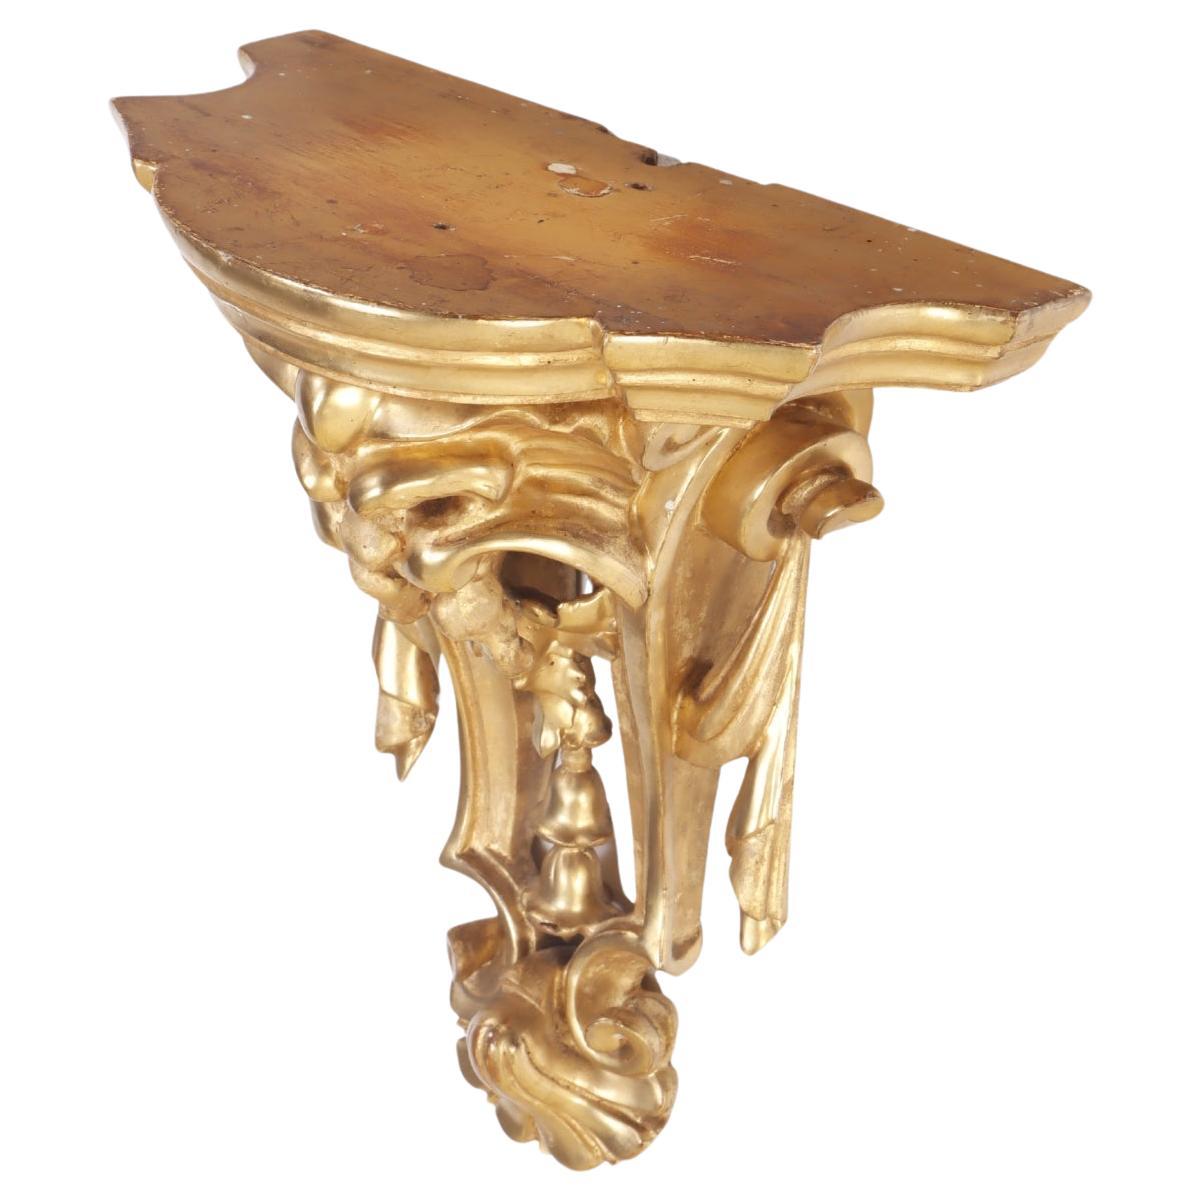 A small French gilt and carved wood wall mounted shelf circa 1880.